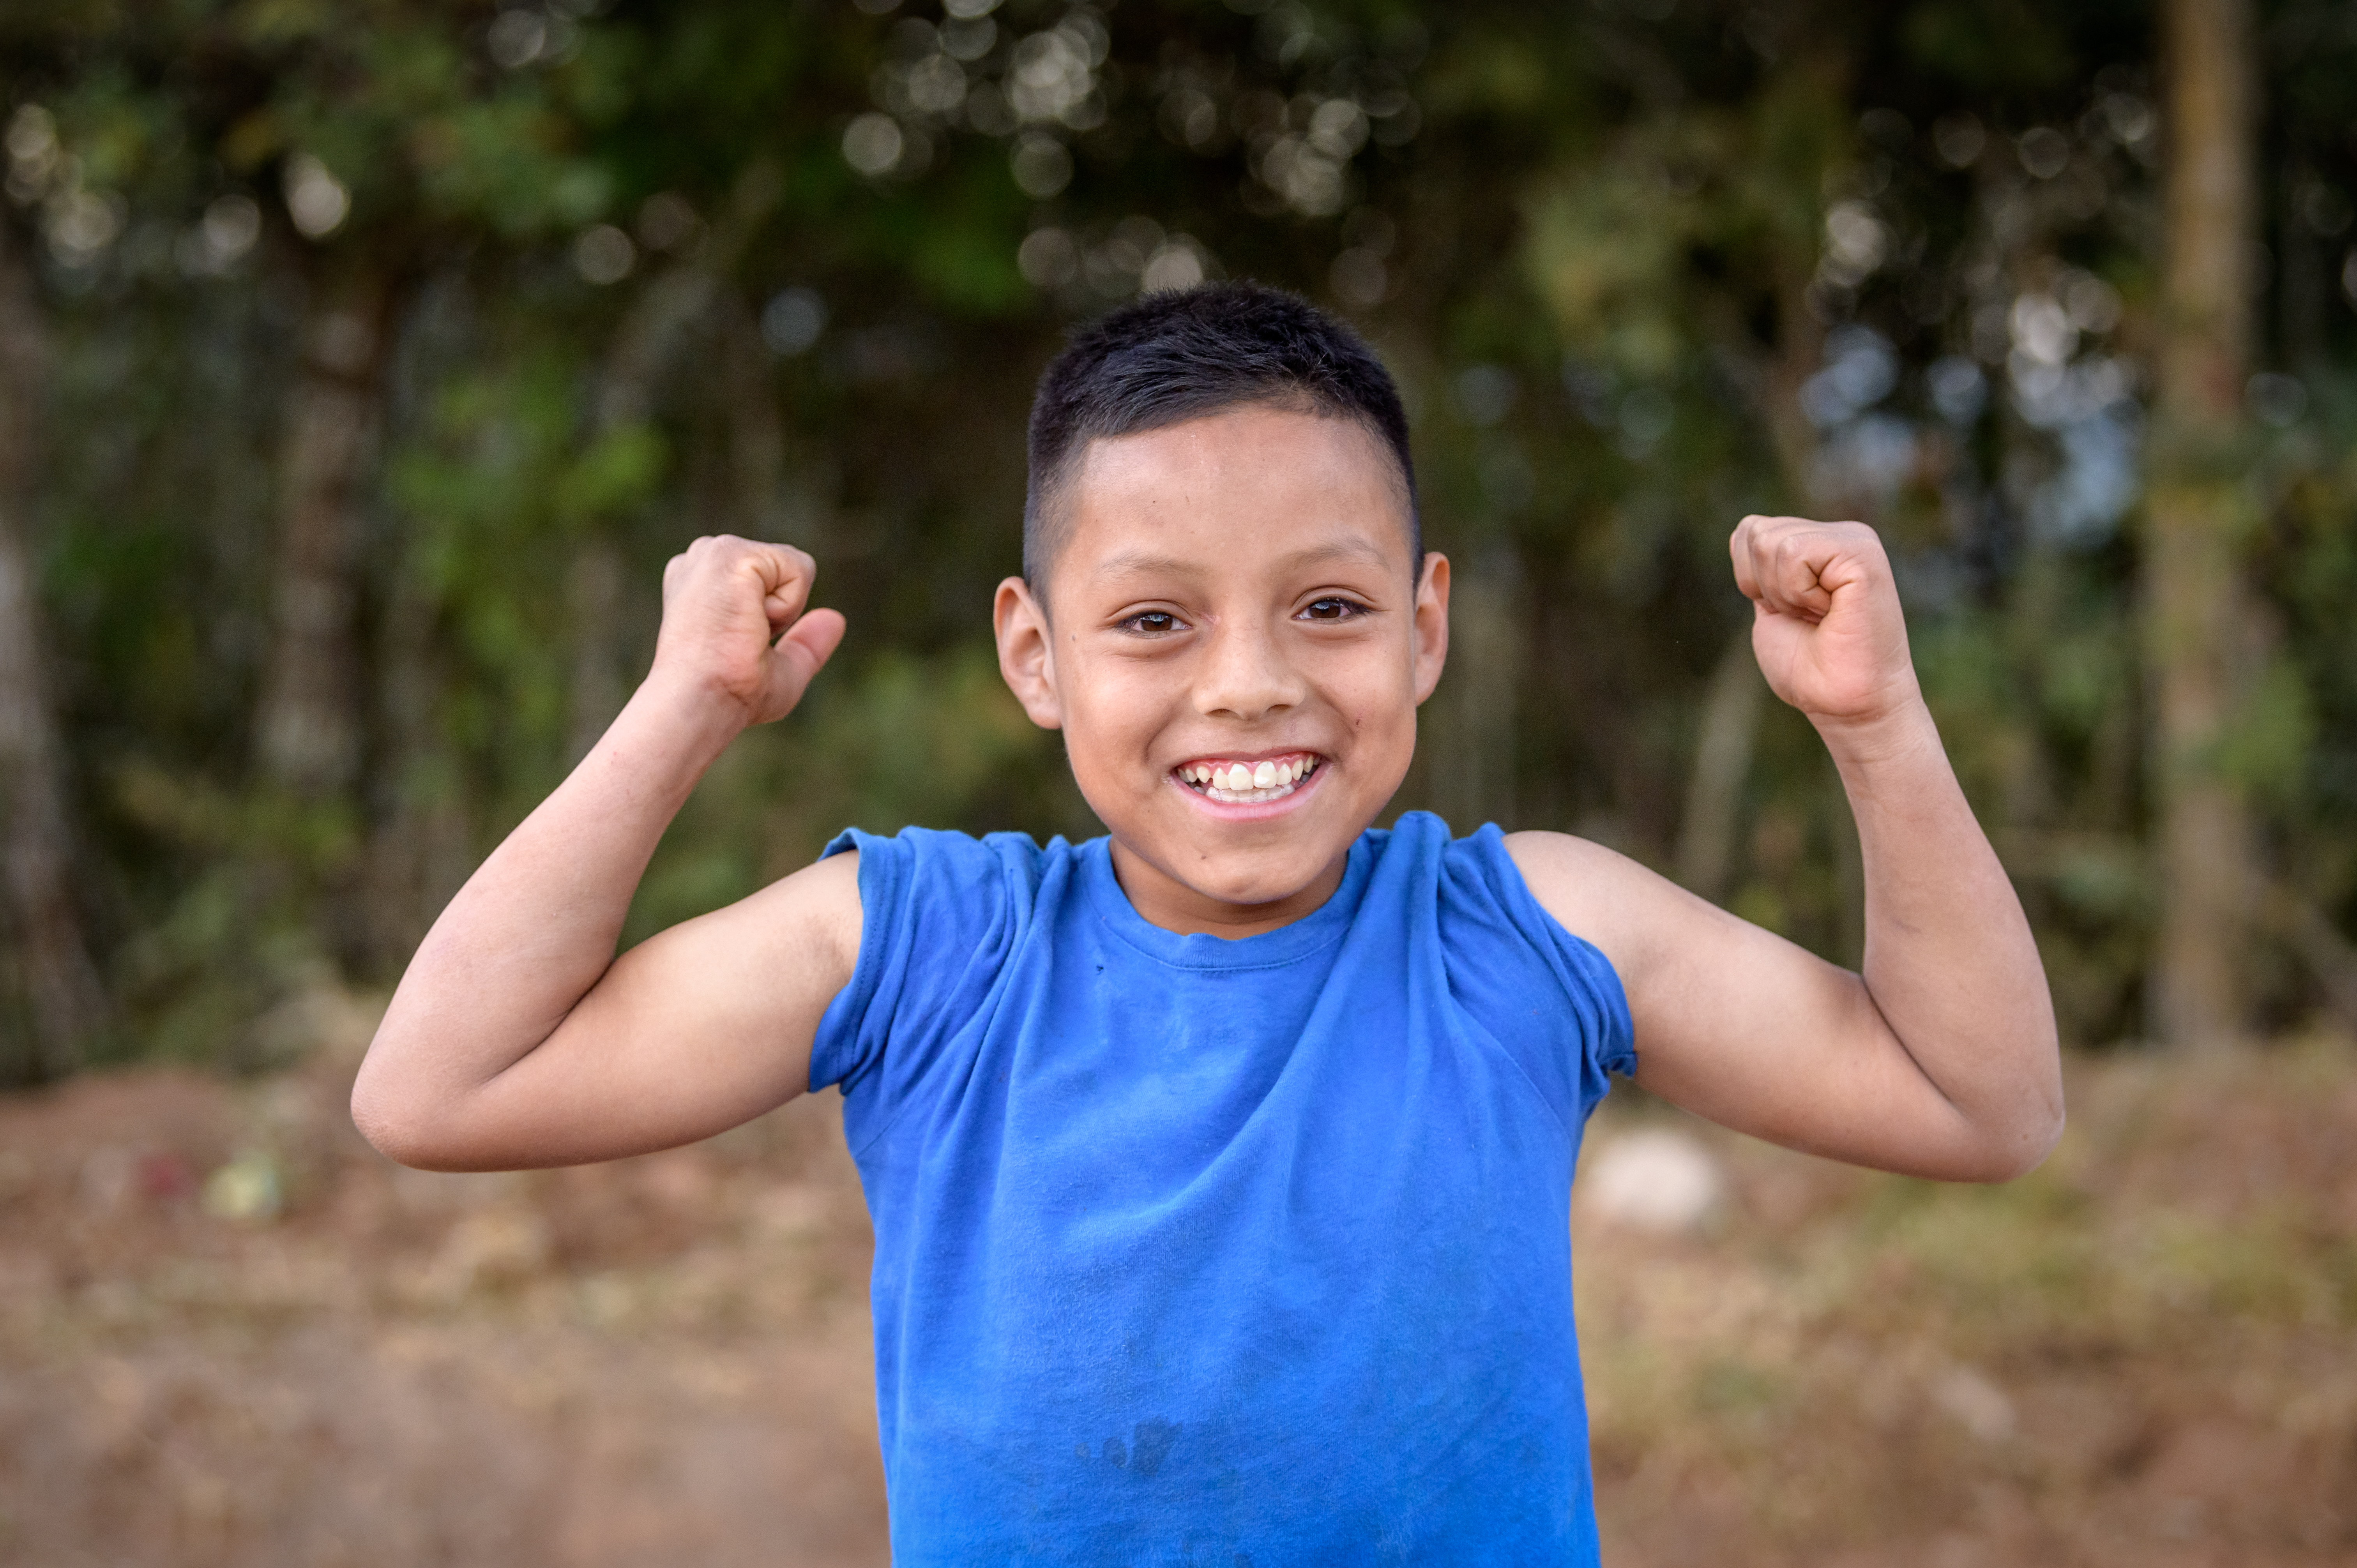 Sponsored child from Honduras grins widely as he shows off his muscles to the camera